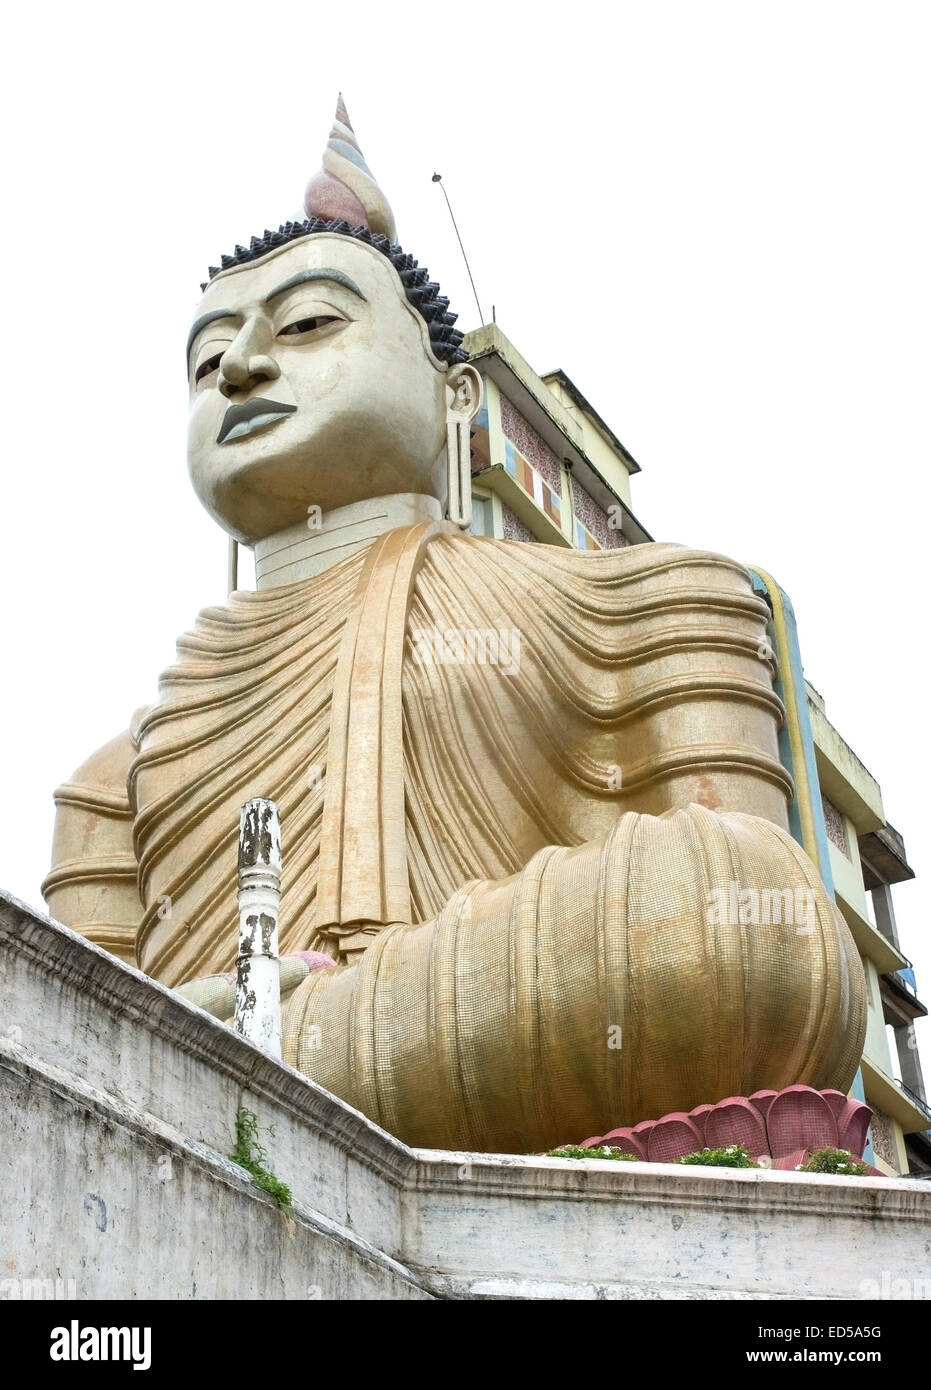 Sri Lanka's largest seated Buddha statue in Dickwella is 50 metres (160 ft) tall. Stock Photo